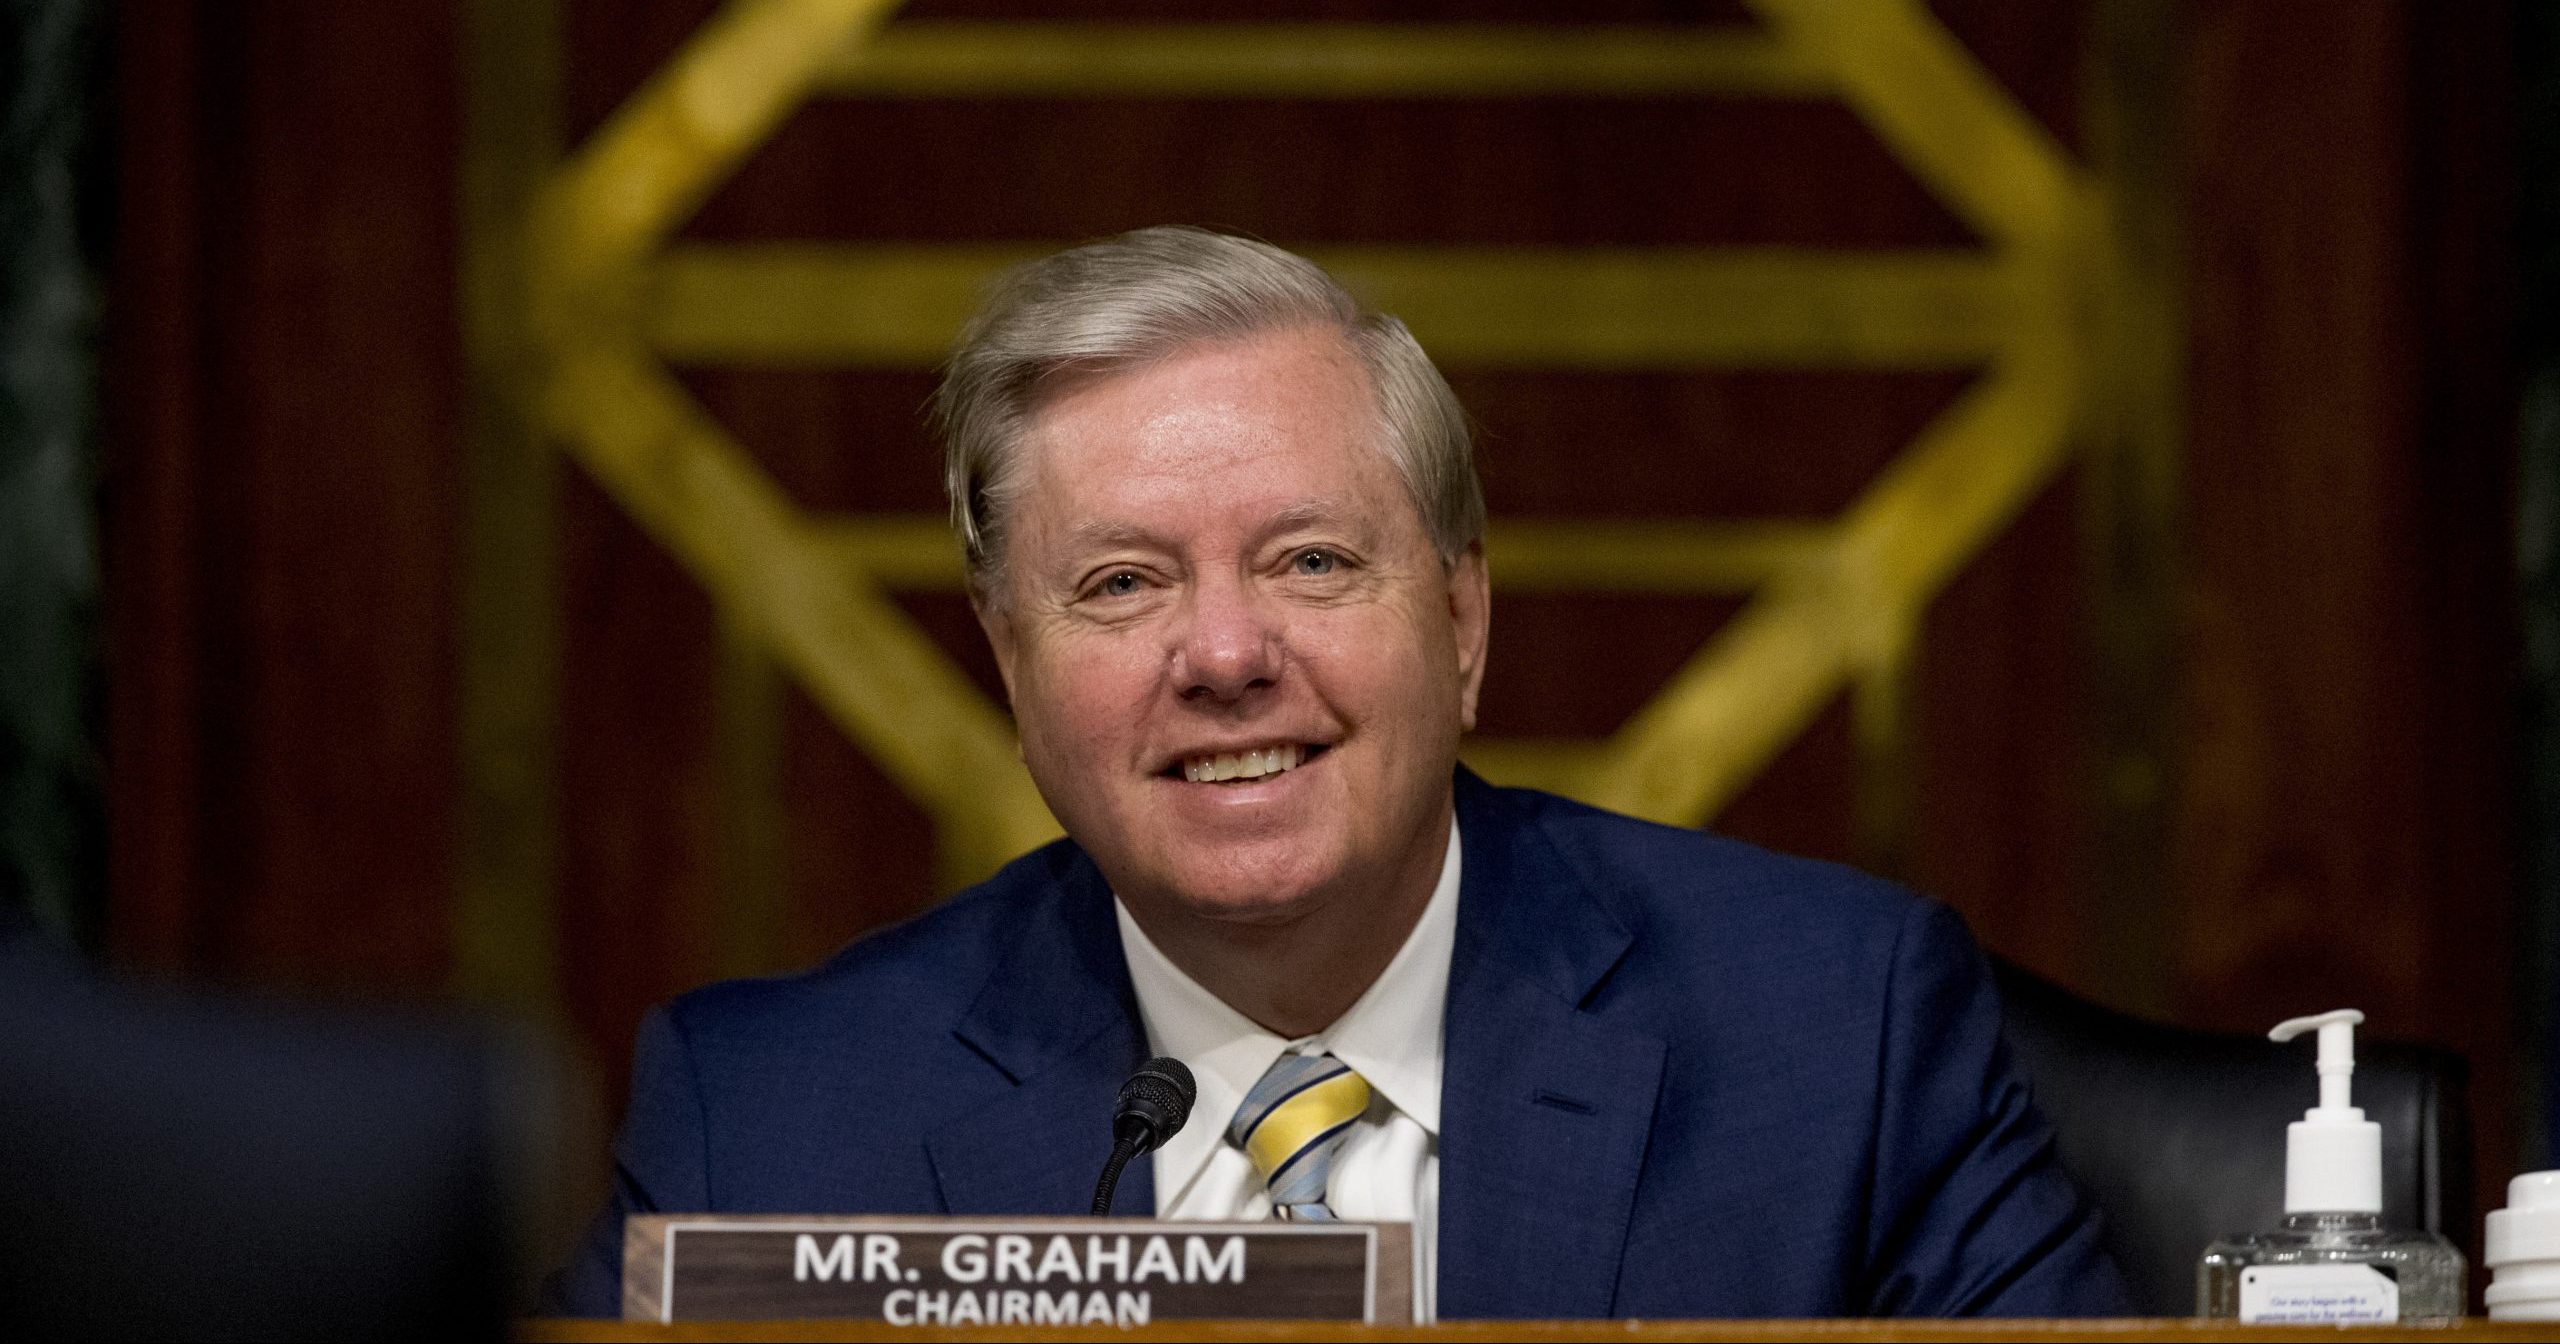 Chairman Sen. Lindsey Graham of South Carolina smiles during a Senate Judiciary Committee hearing on Capitol Hill on June 9, 2020.